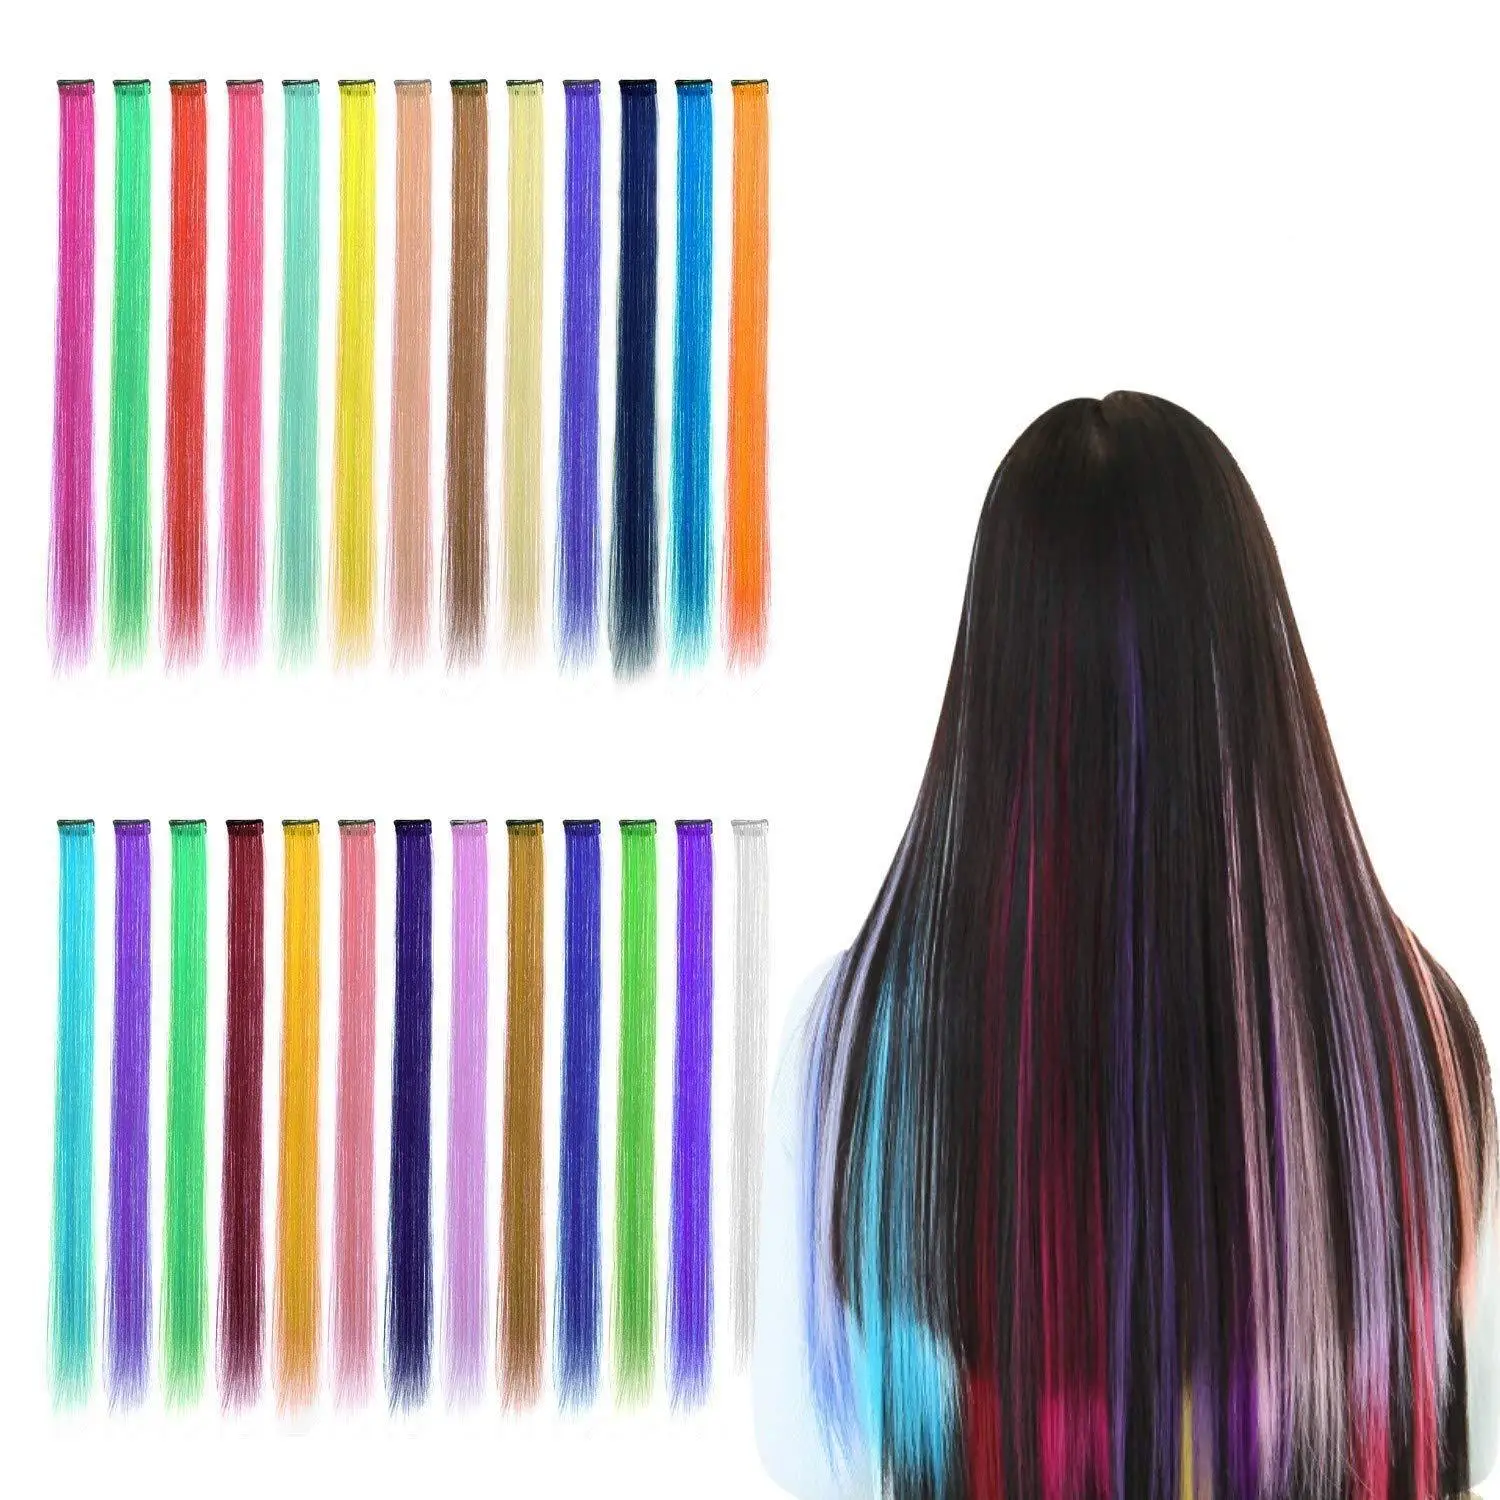 

Funtoninght daily wearing synthetic extension hair natural hair extension colorful party supplies hair piece for girls, Pic showed